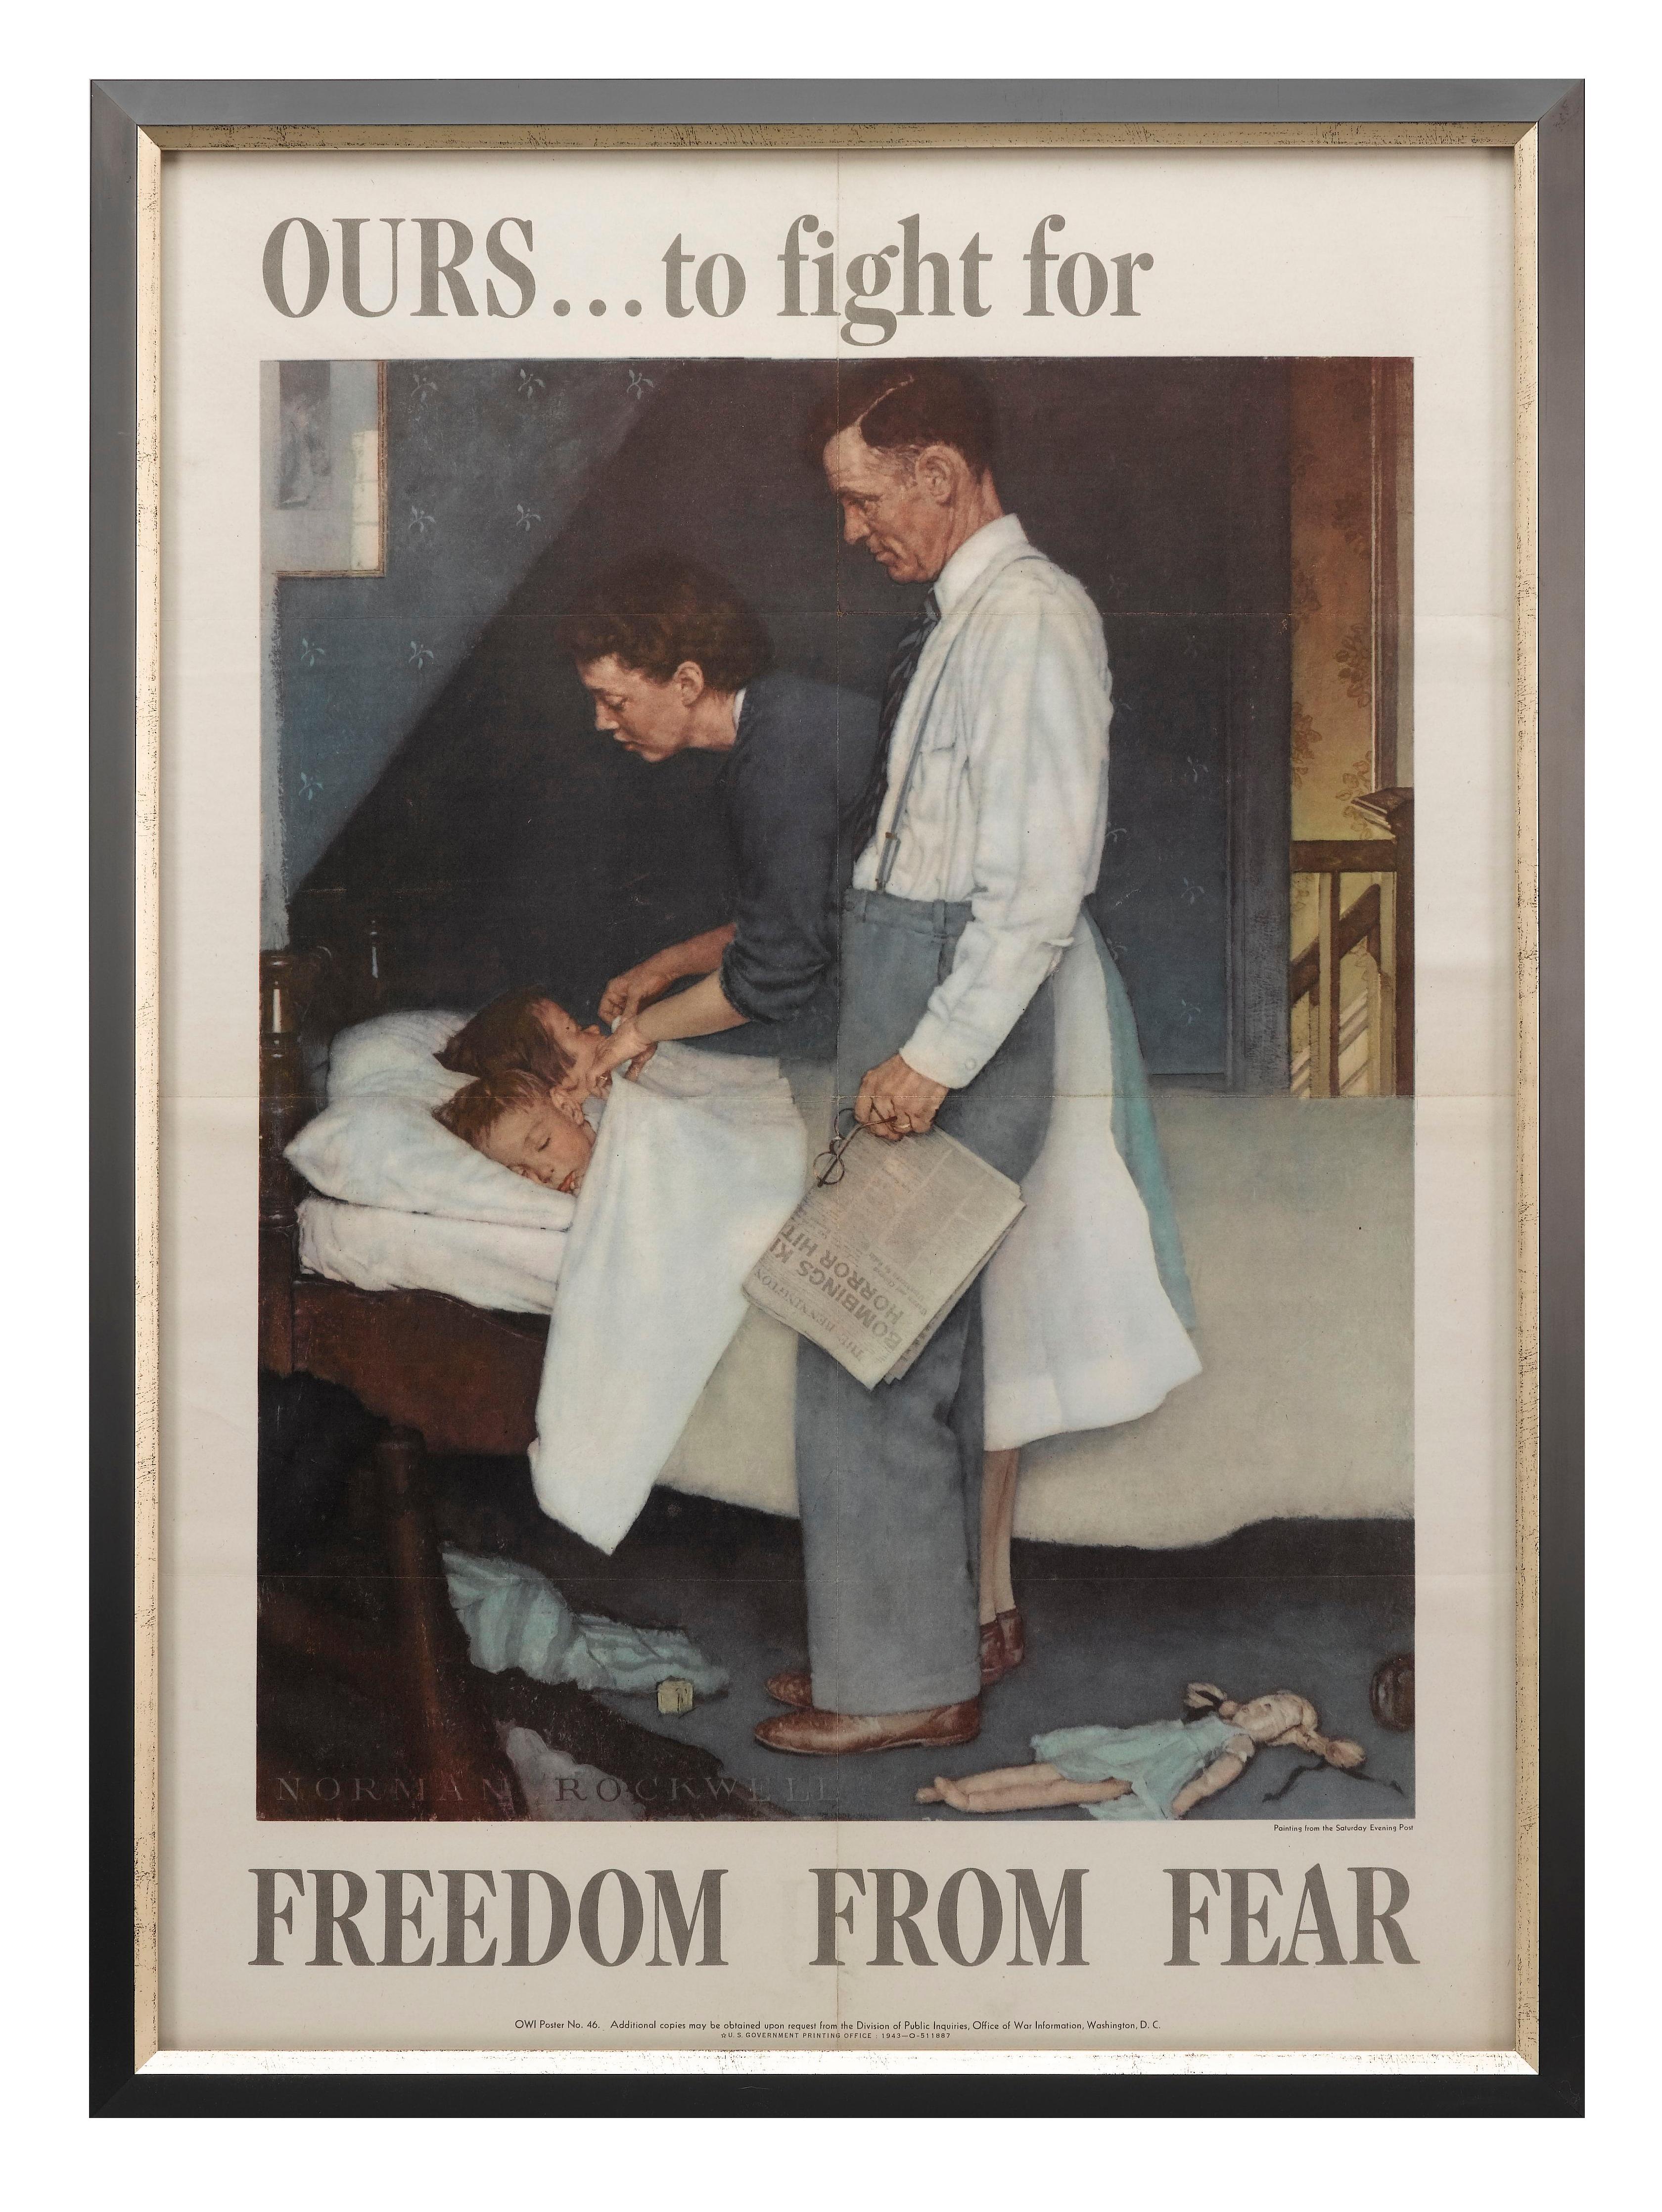 Each of these four War Bonds posters by Norman Rockwell is a visual representation of the closing remarks of President Roosevelt's 1941 State of the Union speech. The posters were produced by Normal Rockwell and published by the War Office.